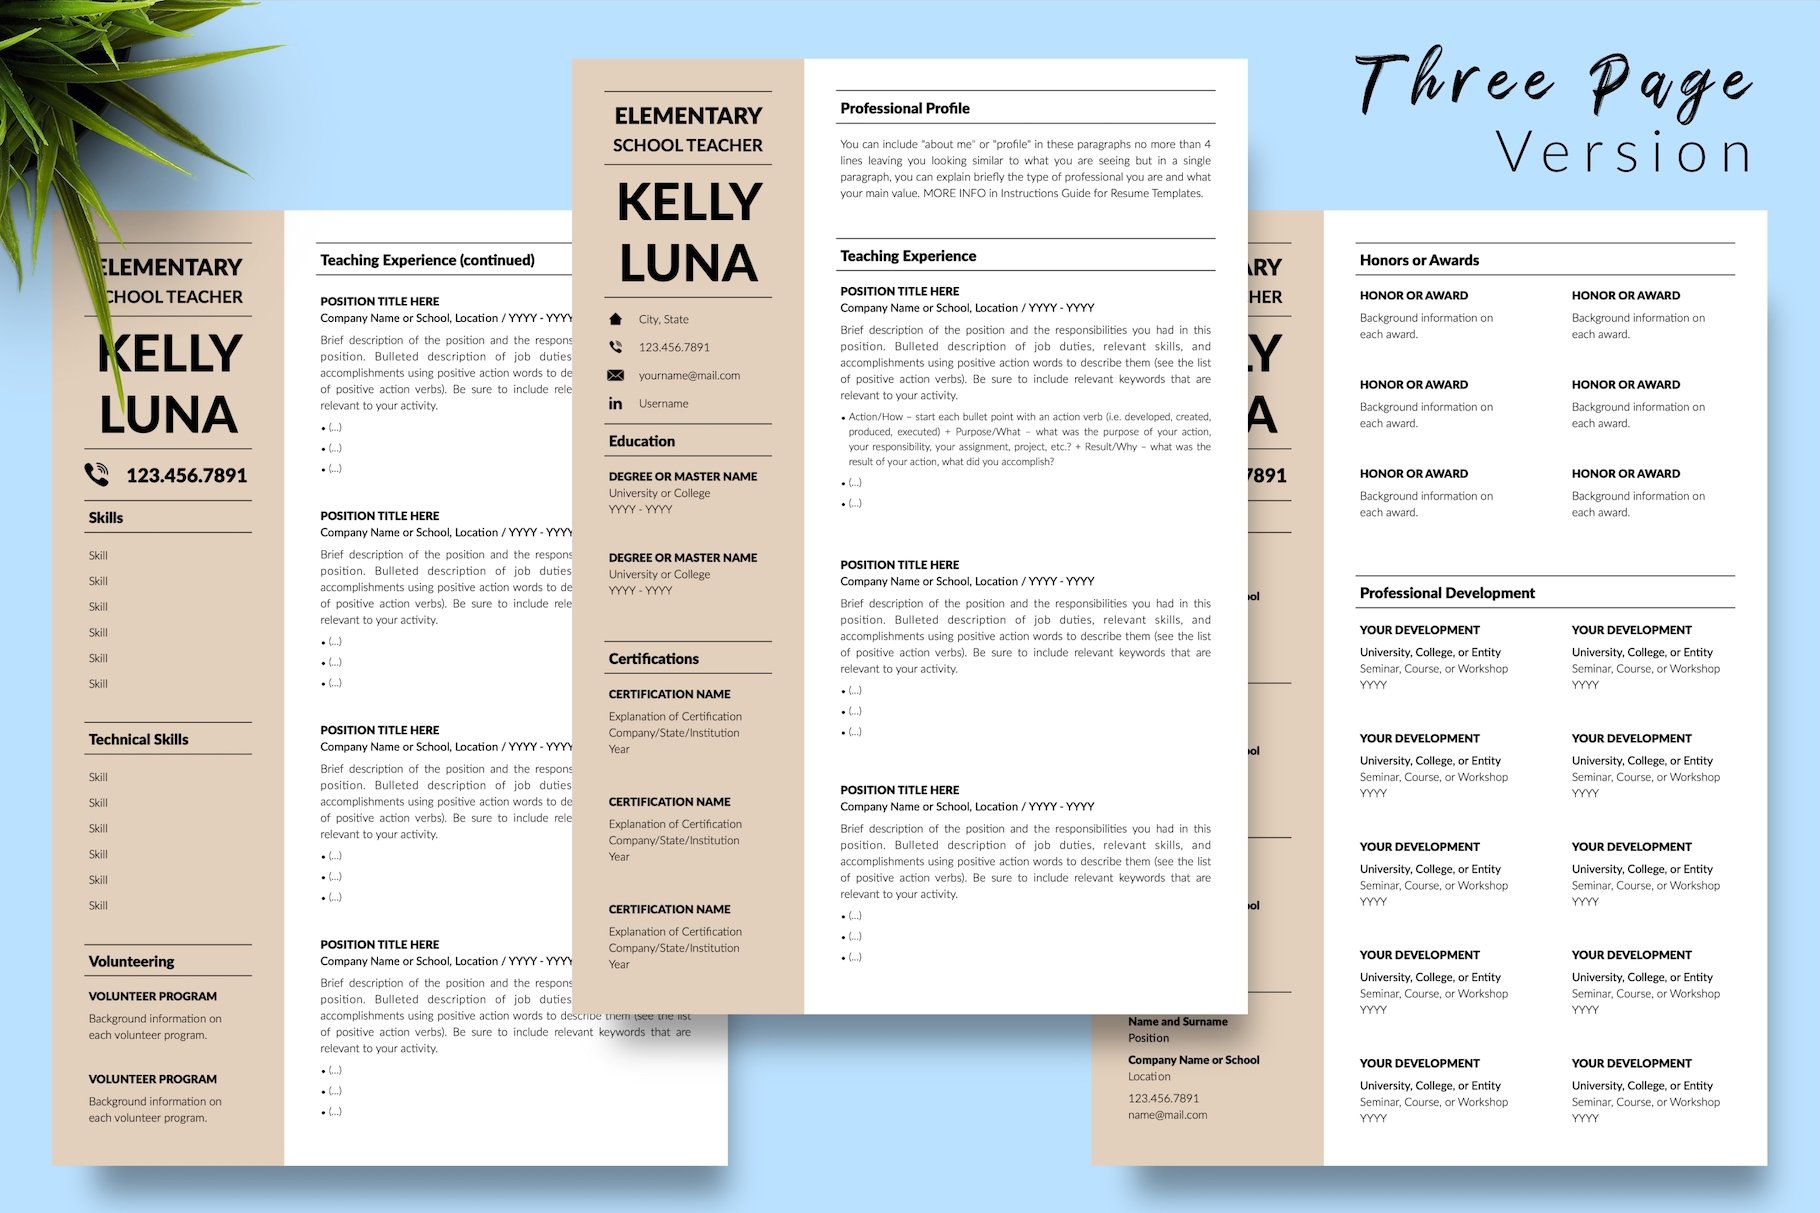 resume cv template kelly luna for creative market 04 three page version 735